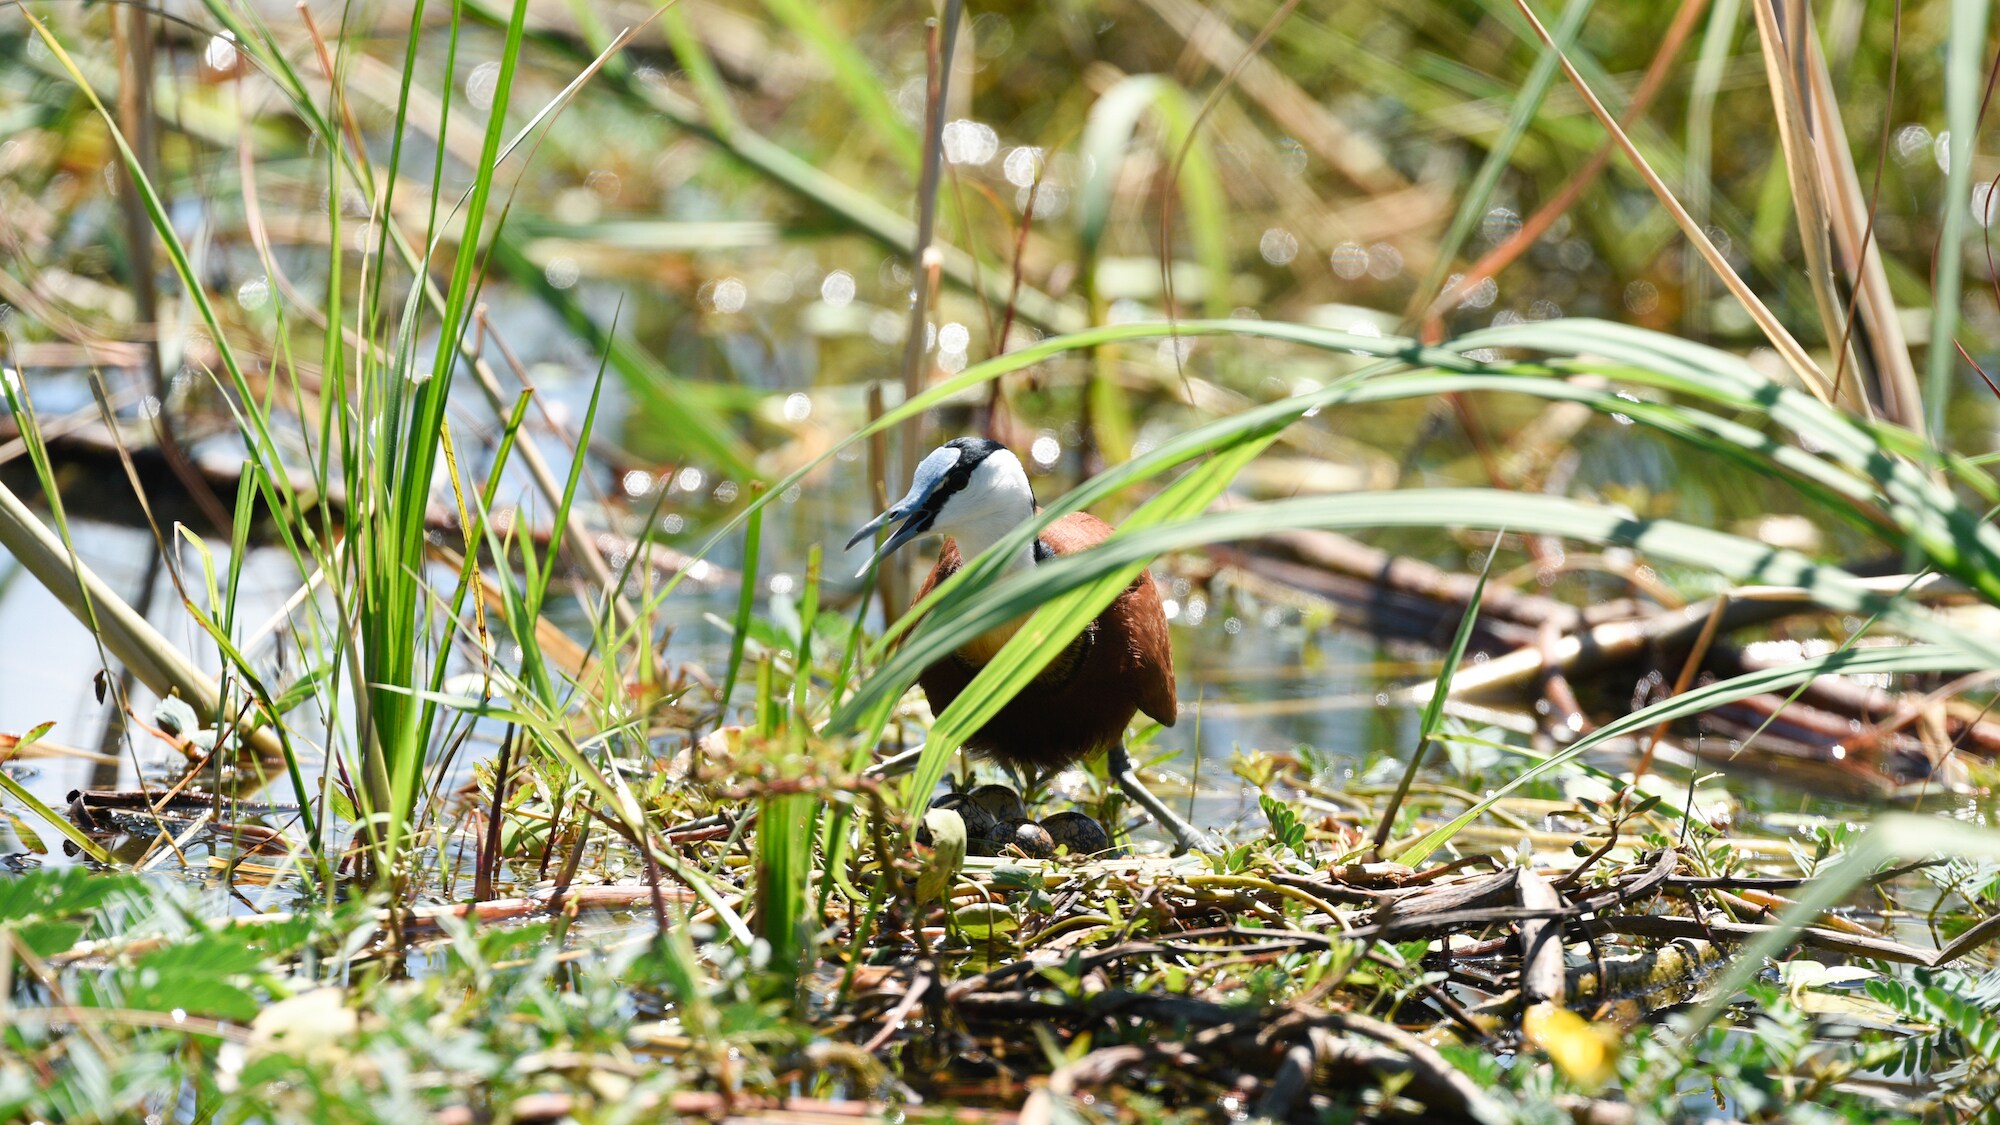 Adult jacana walking in between reeds. (National Geographic for Disney+/Carl Ruysenarr)